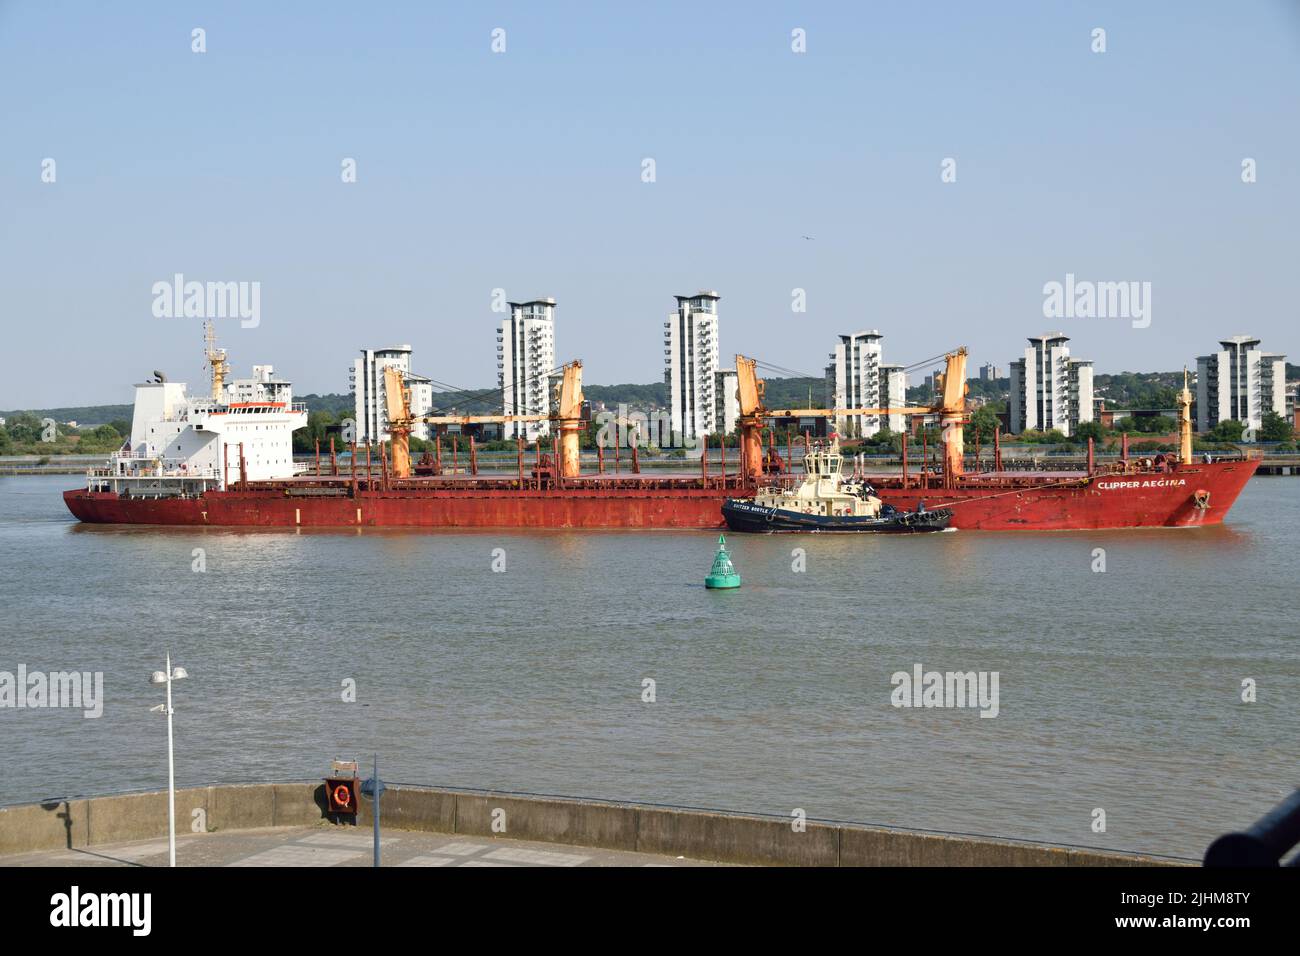 Bulk Carrier CLIPPER AEGINA arrives from Brazil with a load of raw sugar for Tate & Lyle sugars at Silvertown, London Stock Photo